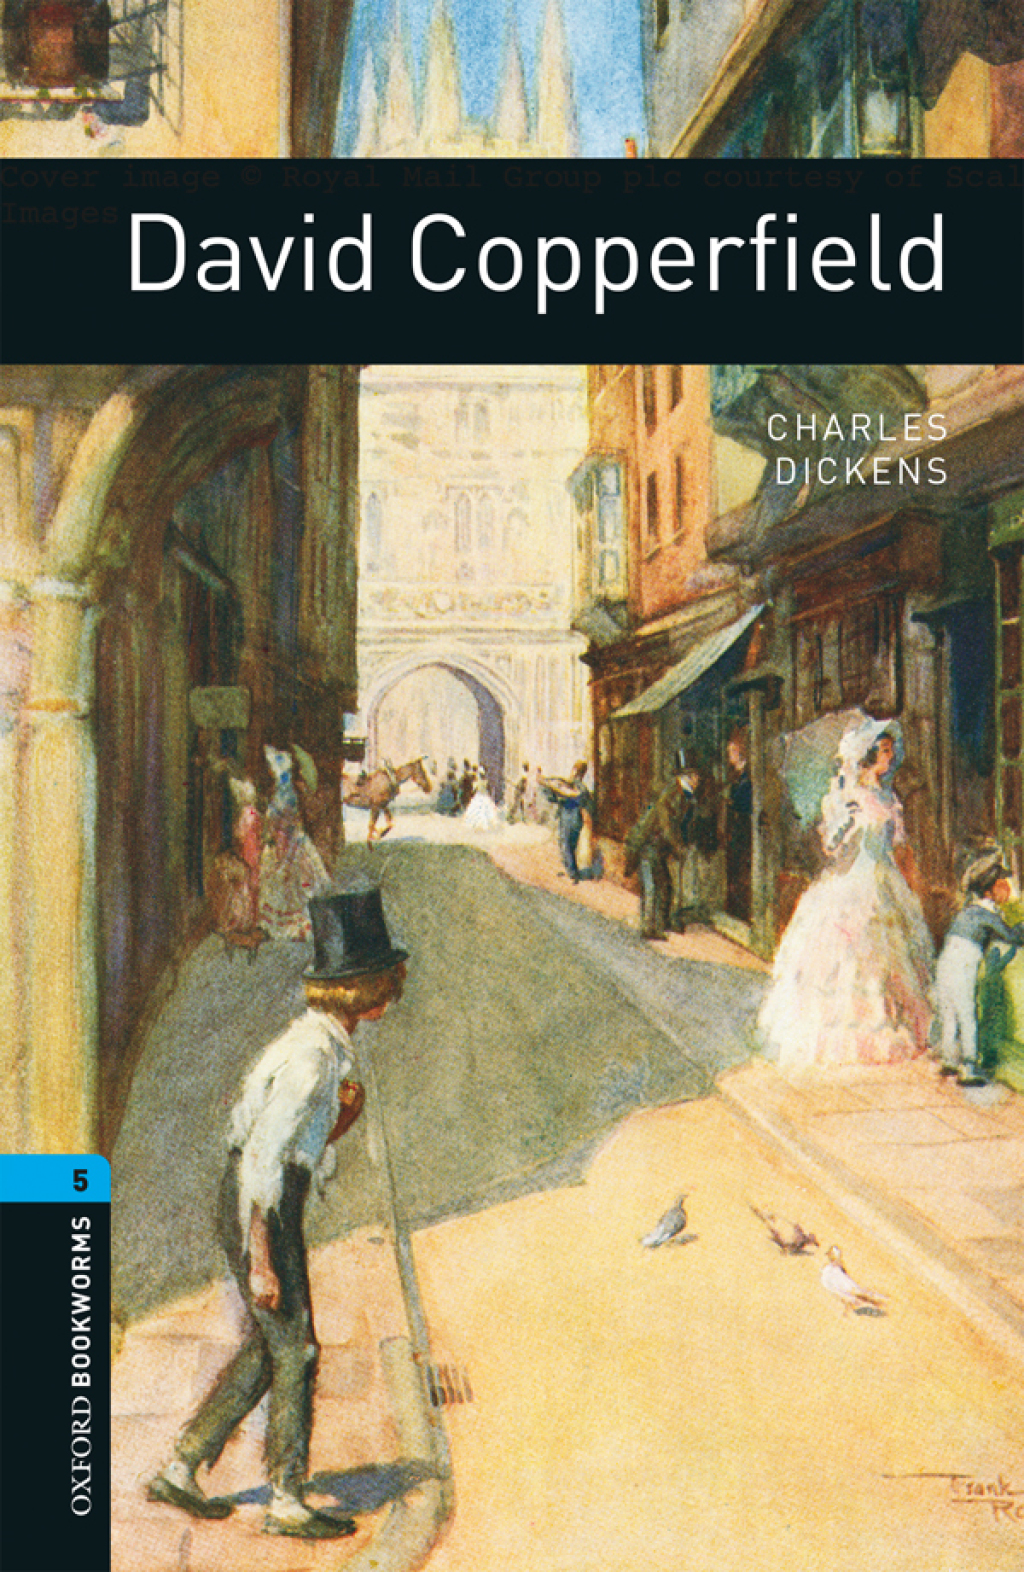 David Copperfield Level 5 Oxford Bookworms Library - 3rd Edition (eBook Rental)